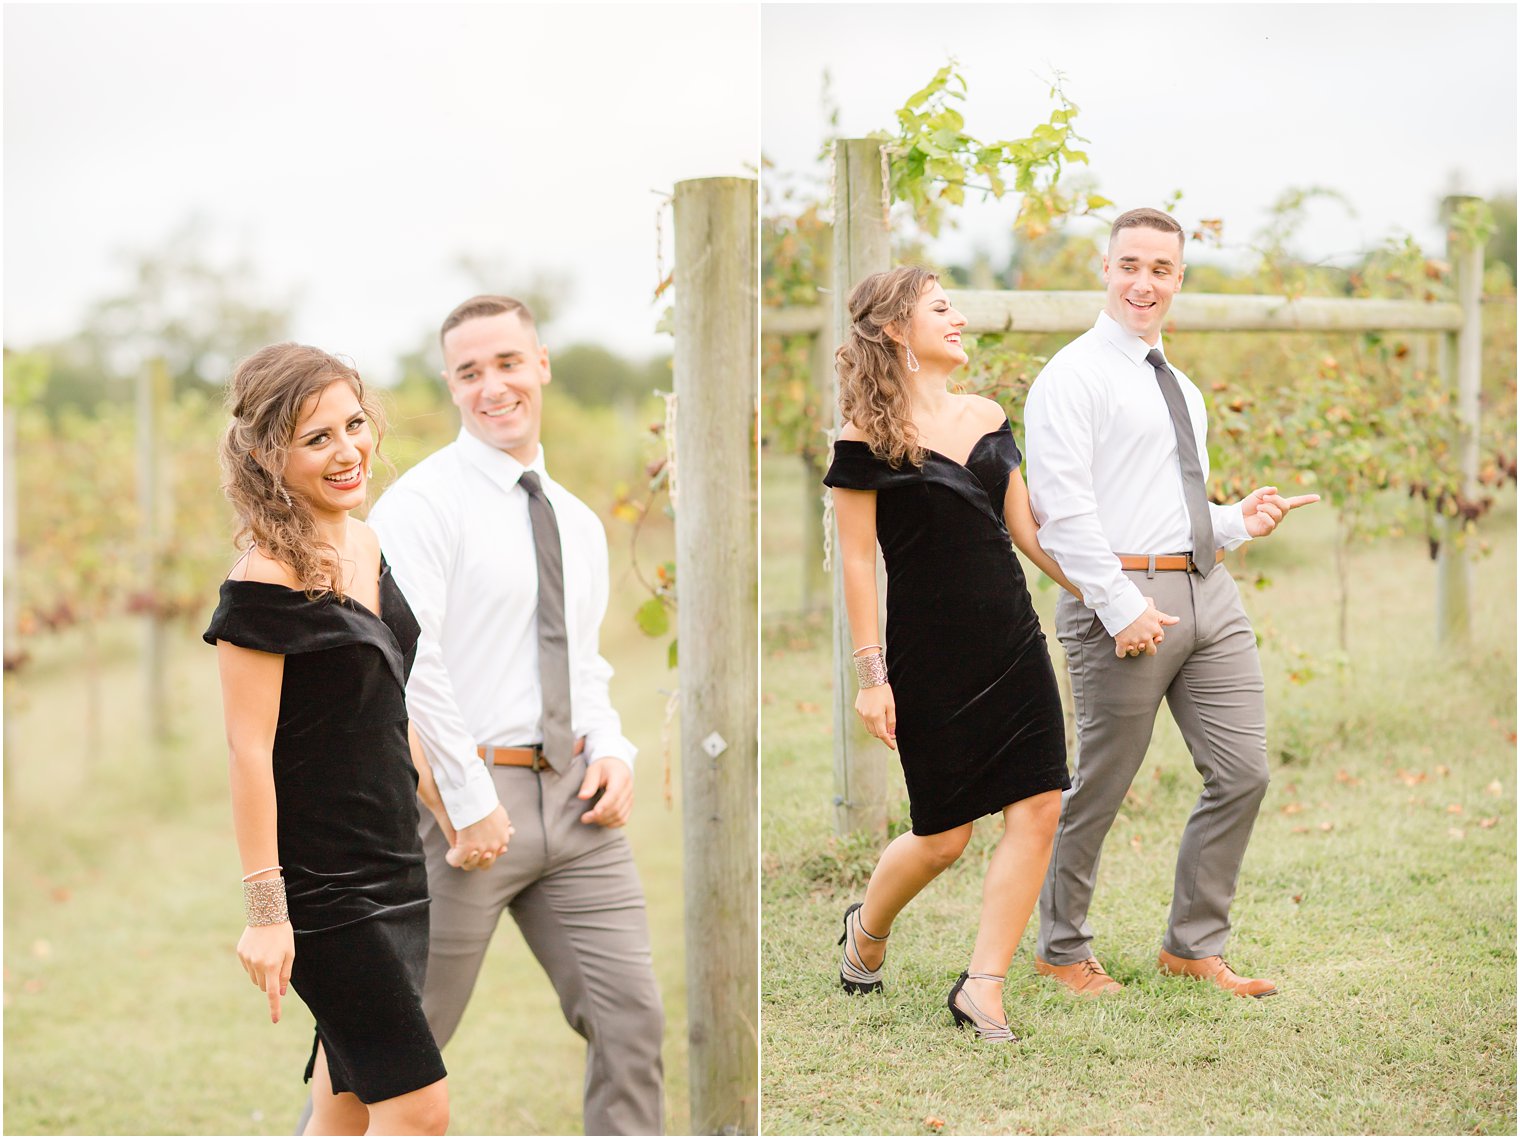 Couple laughing during Engagement at Willow Creek Winery | Photos by Idalia Photography